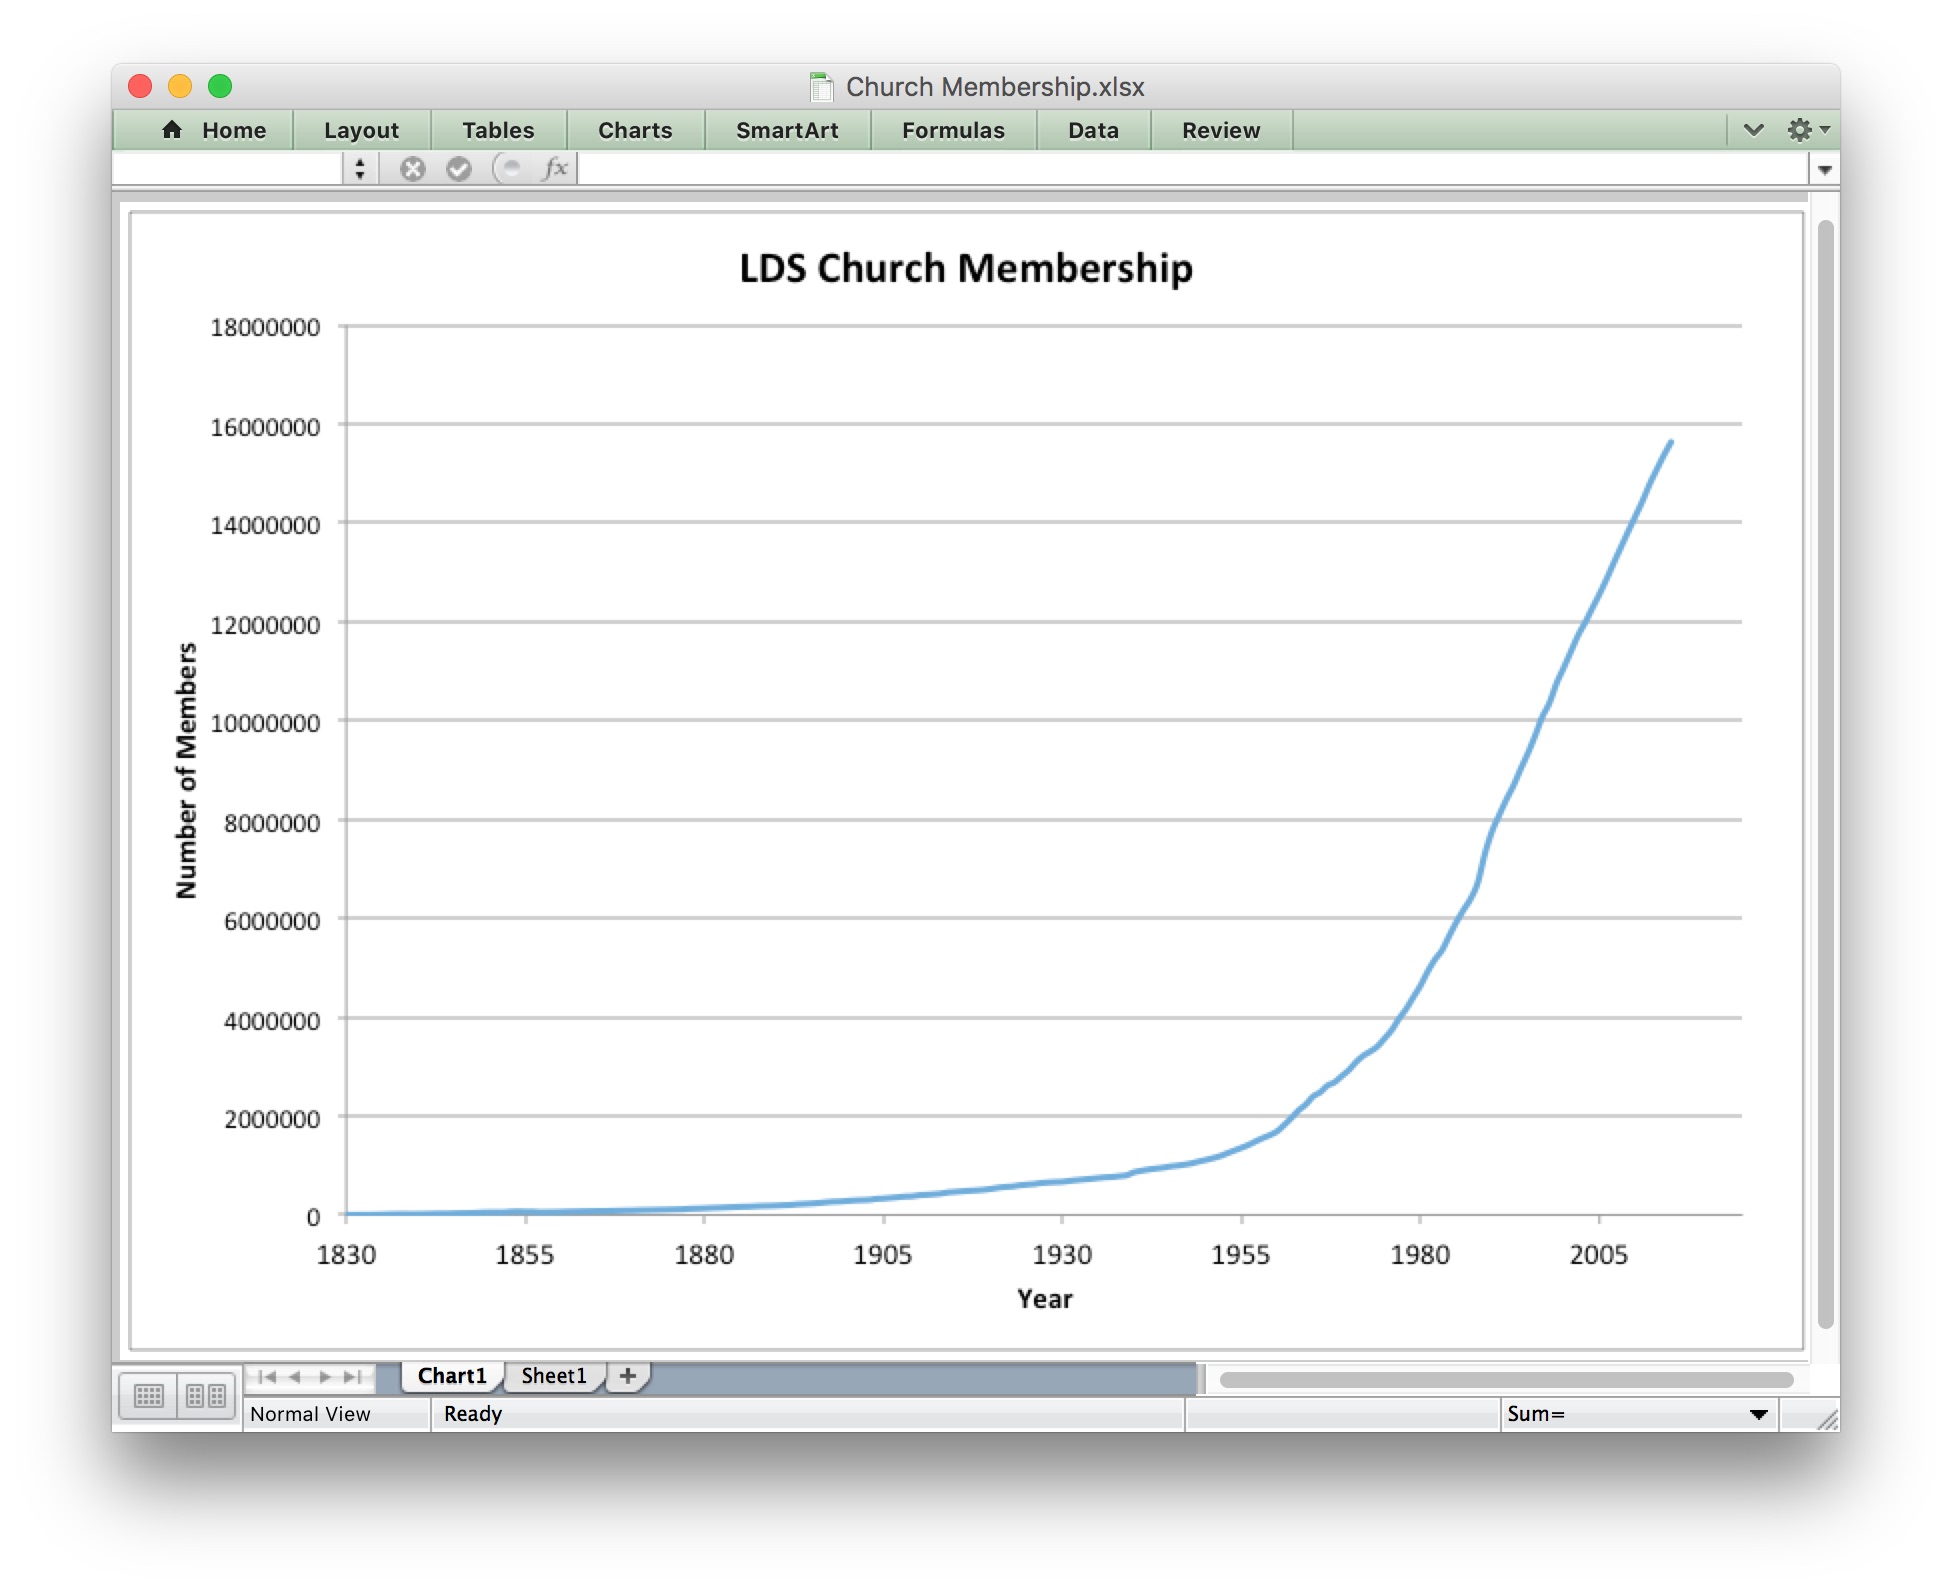 Graph of Church Membership over Time